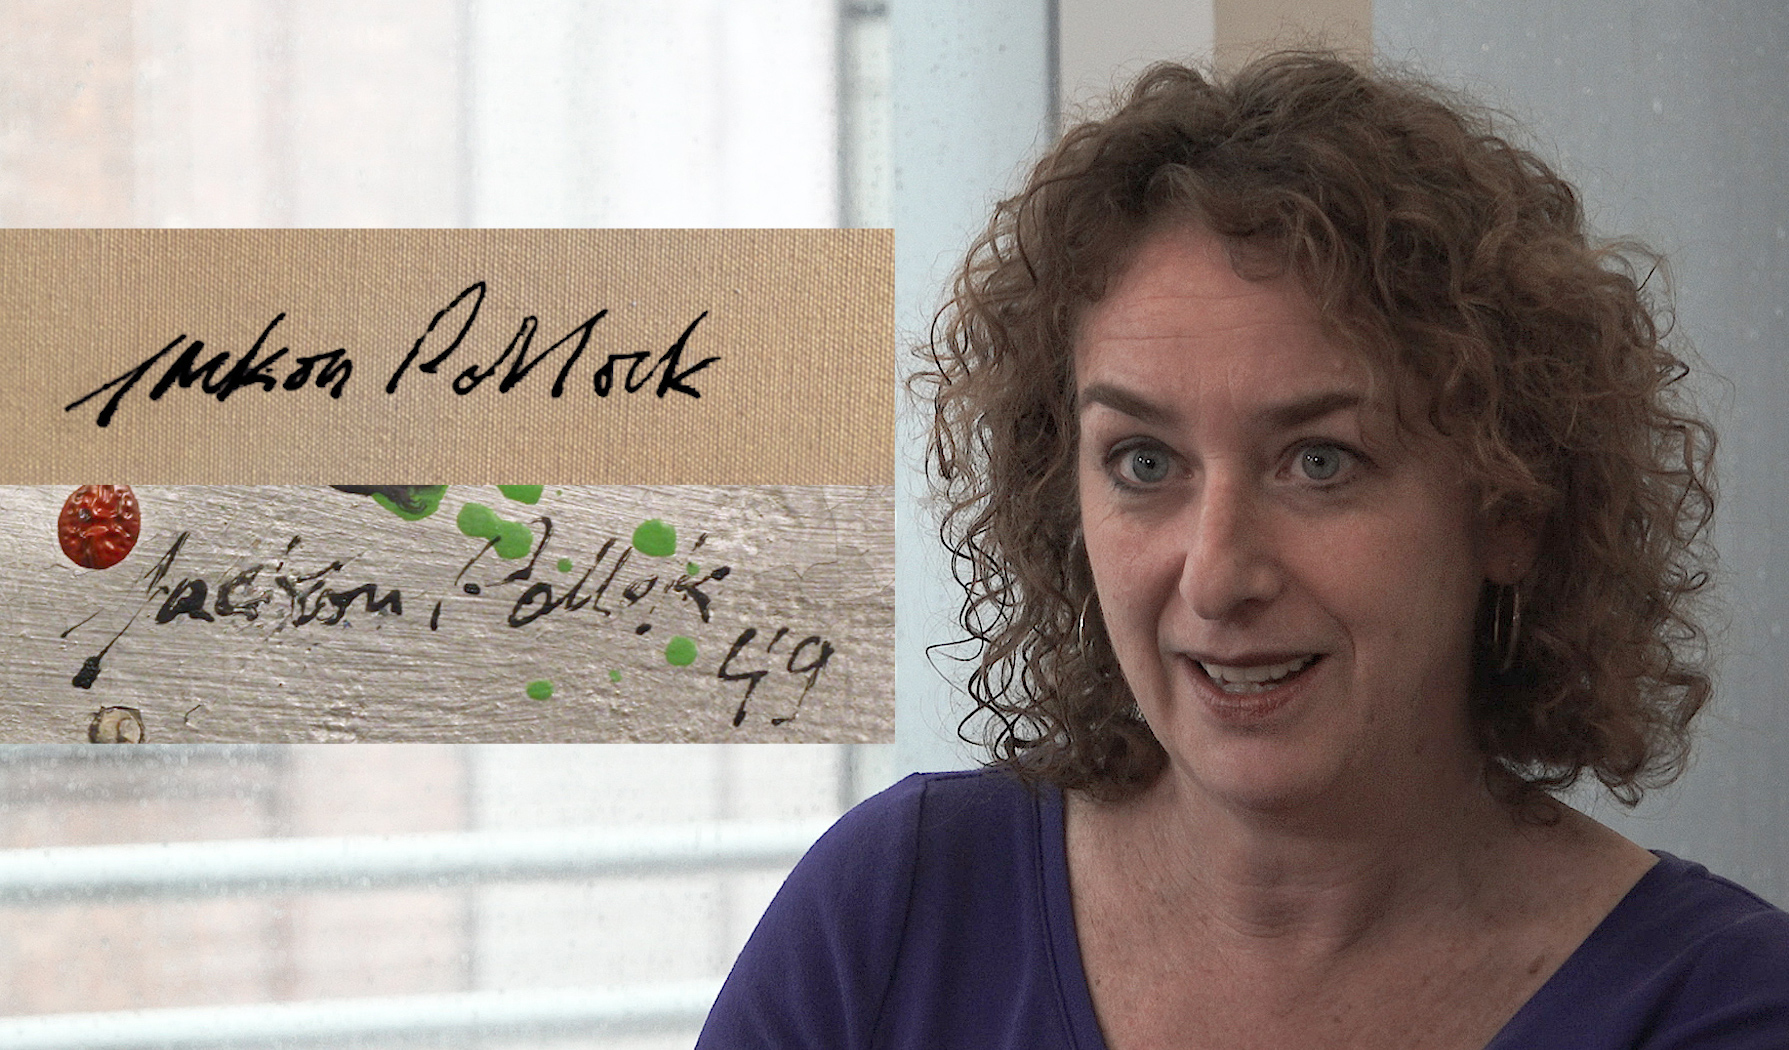 New York Times reporter Patricia Cohen with an image of a mispelled Pollock signaure in the film 